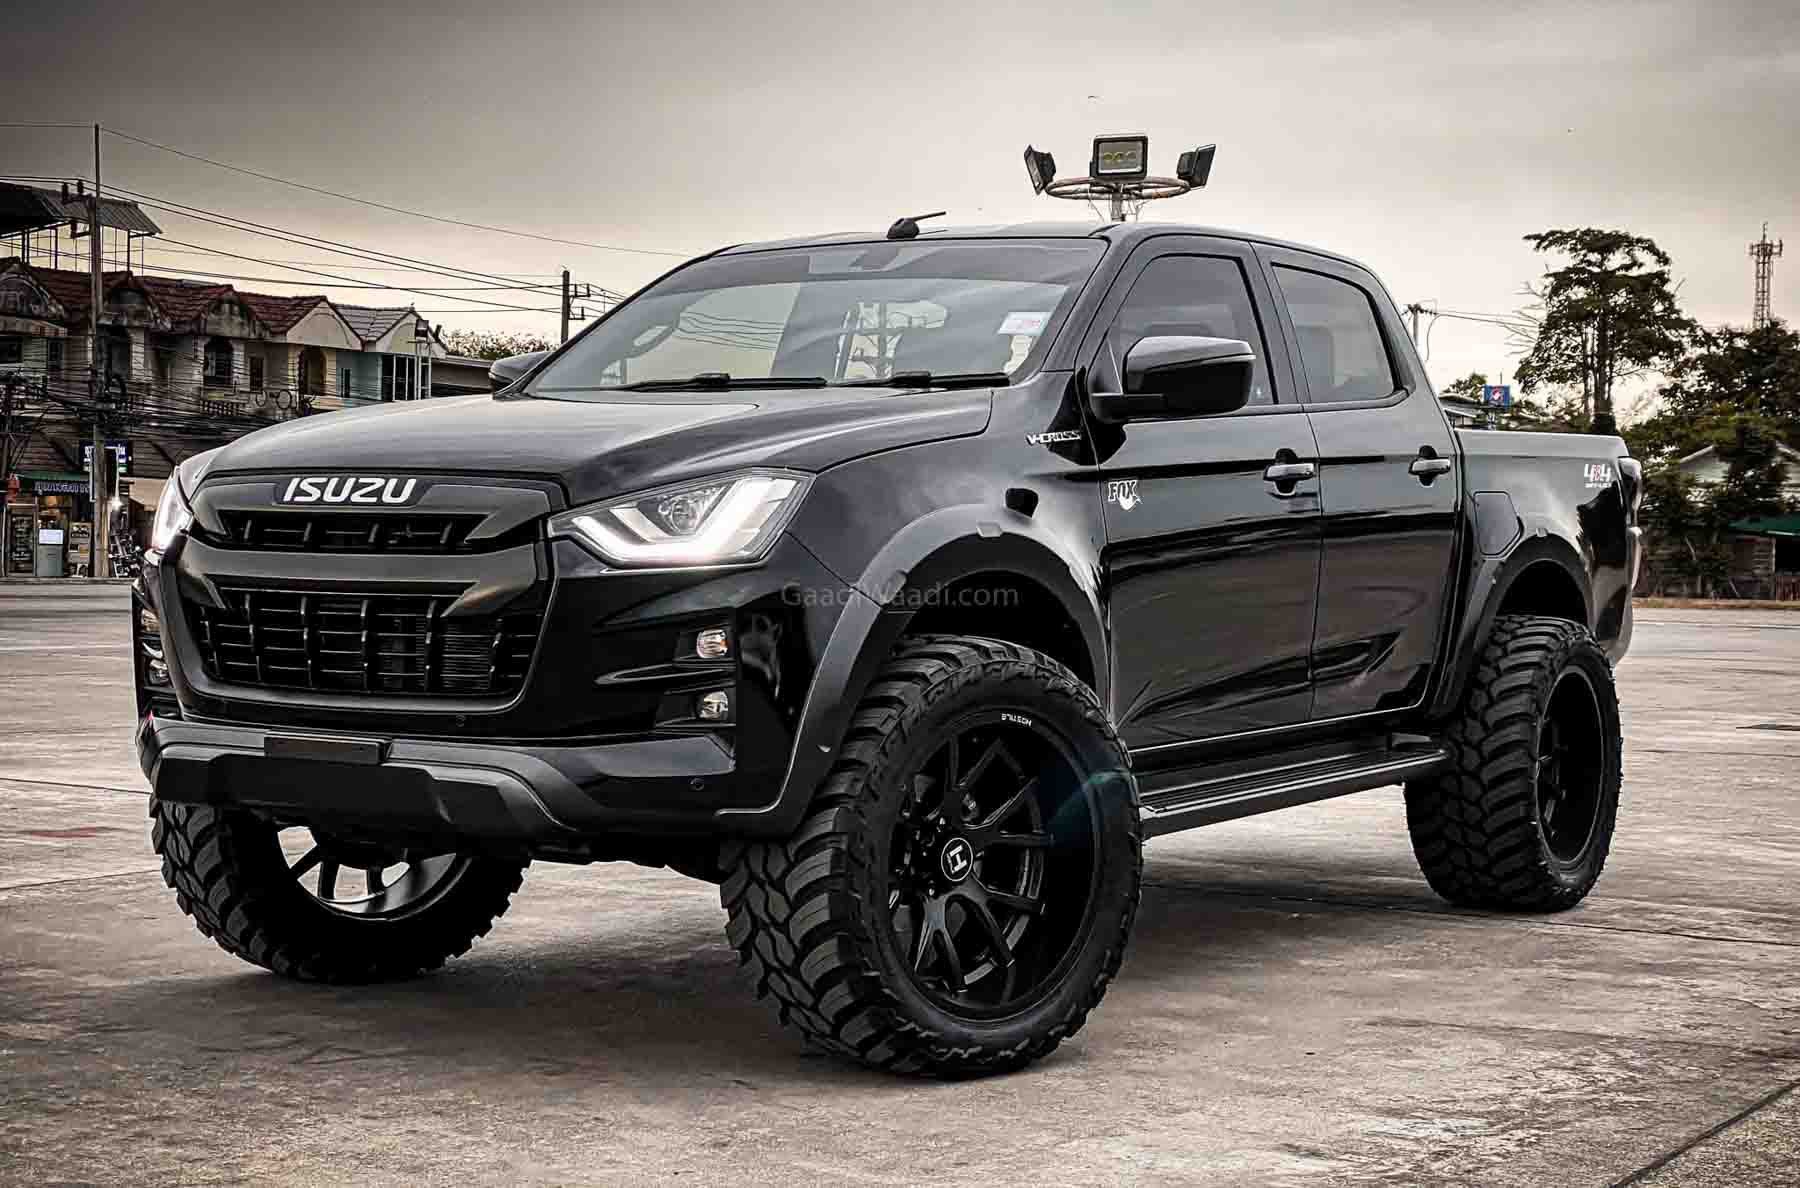 Download This Modified Isuzu D-Max V-Cross is the Pickup Truck of Your Dreams!